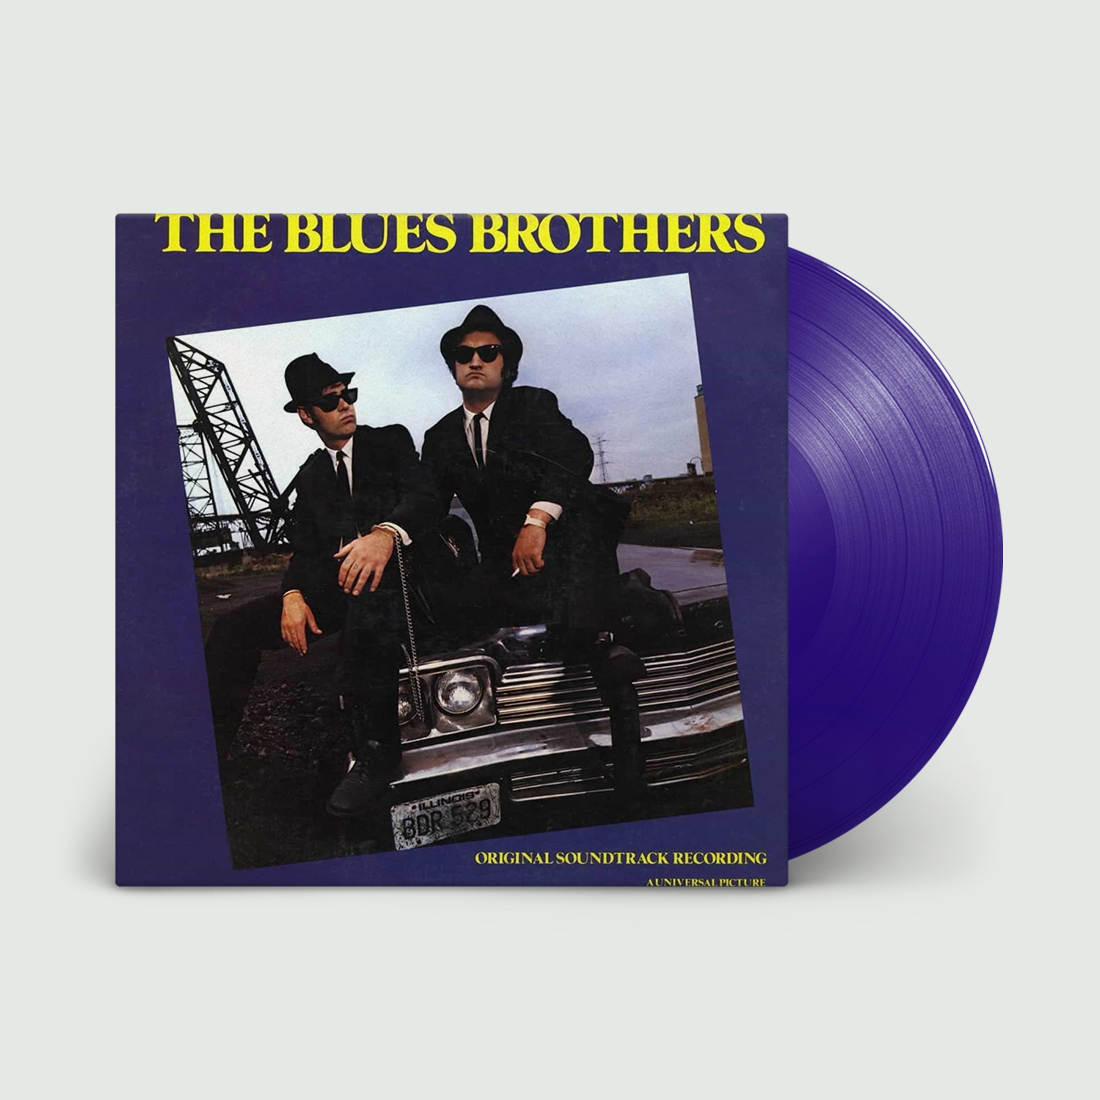 THE BLUES BROTHERS - The Blues Brothers OST - LP - Limited Transparent Blue Vinyl [NAD-OCT10] [NAD-OCT10]